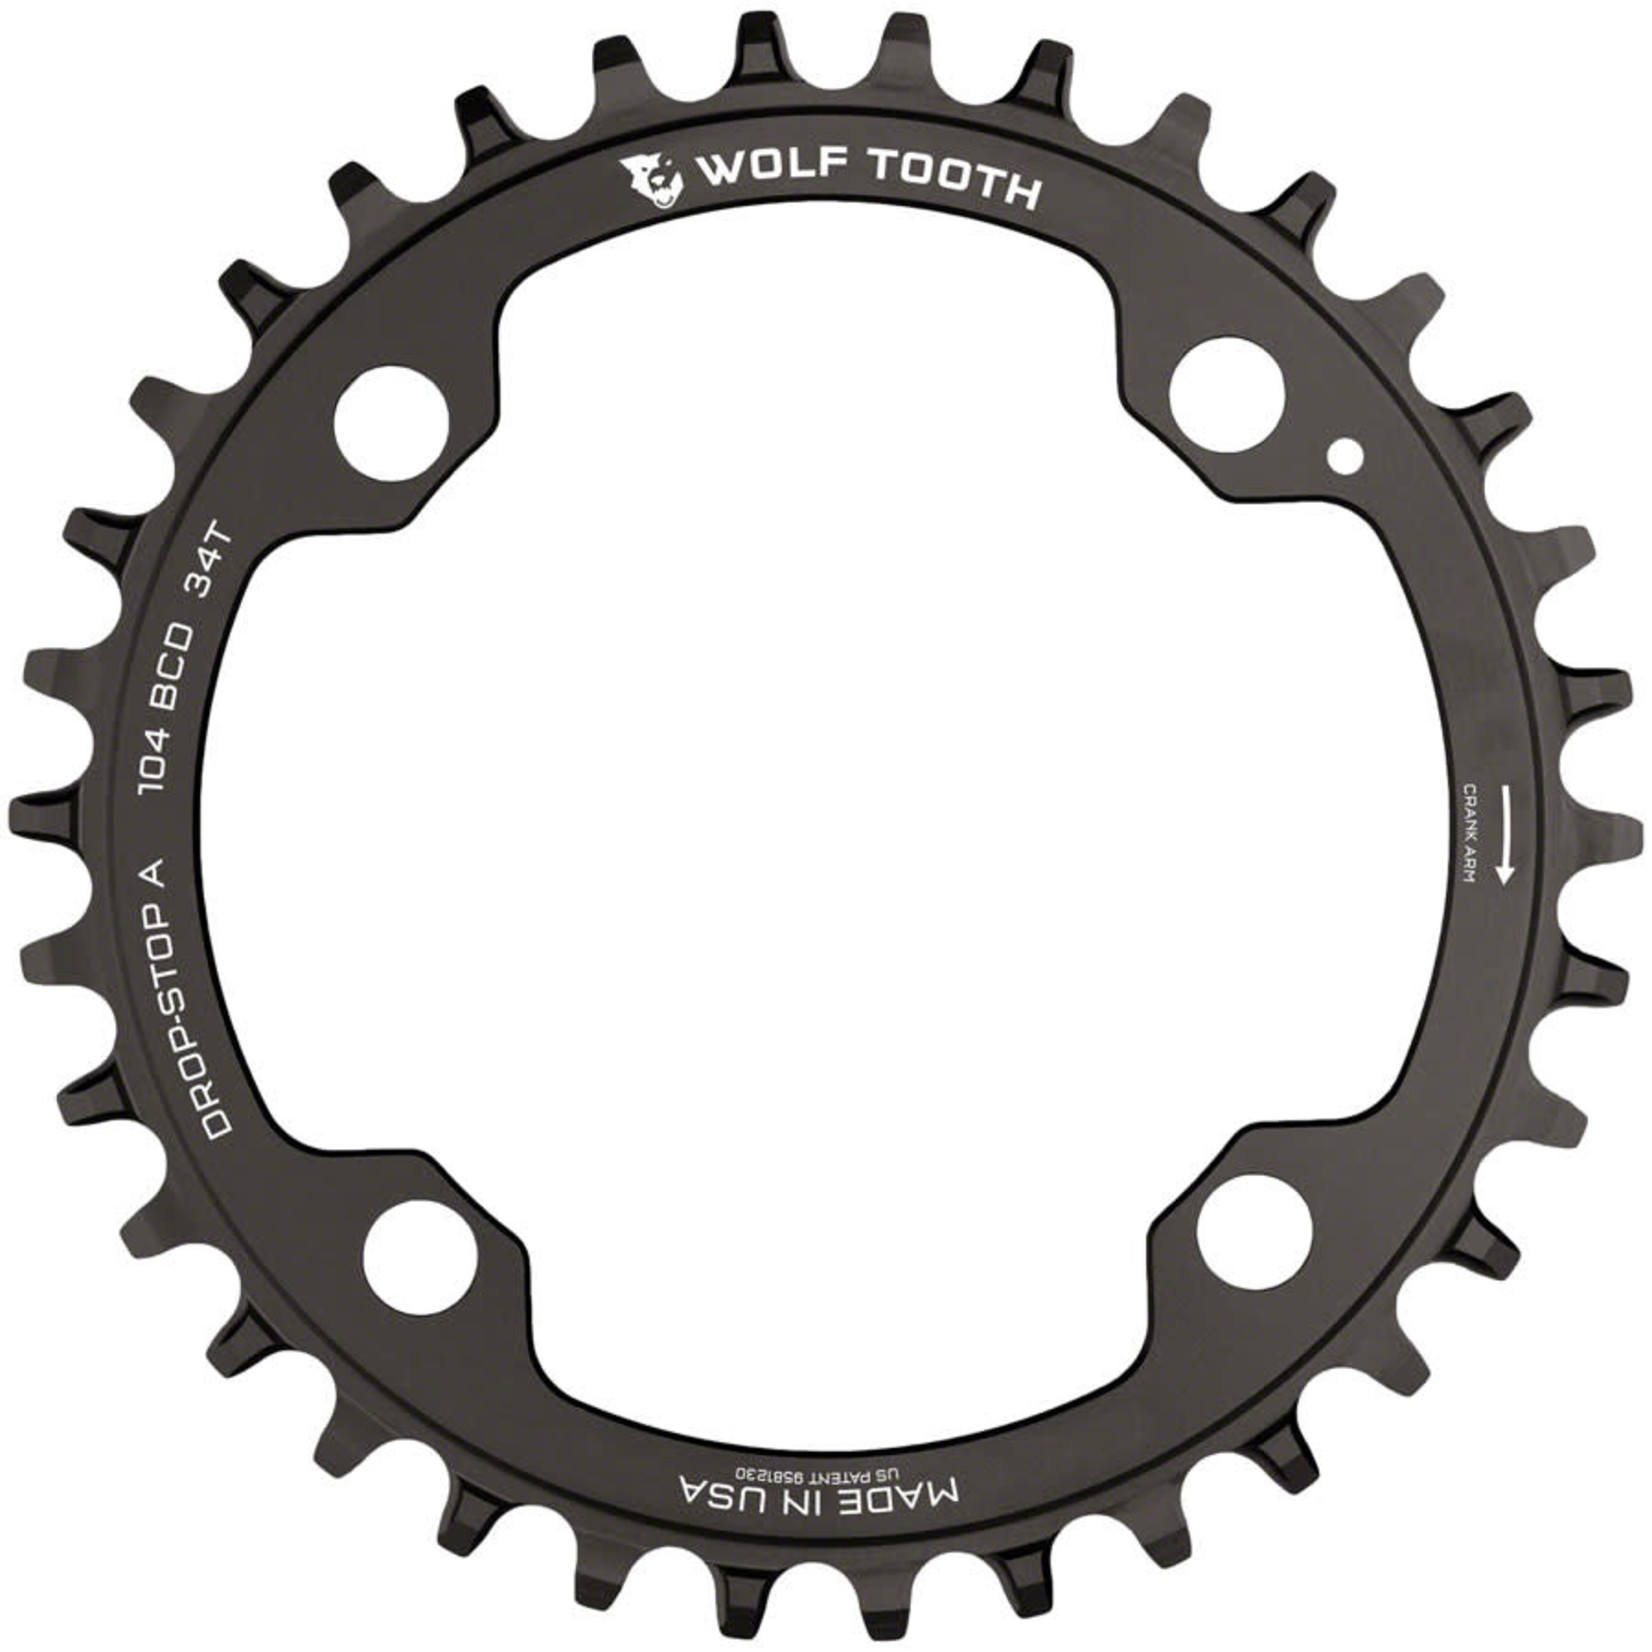 Wolf Tooth Wolf Tooth 104 BCD Chainring - 32t, 104 BCD, 4-Bolt, Drop-Stop, Black